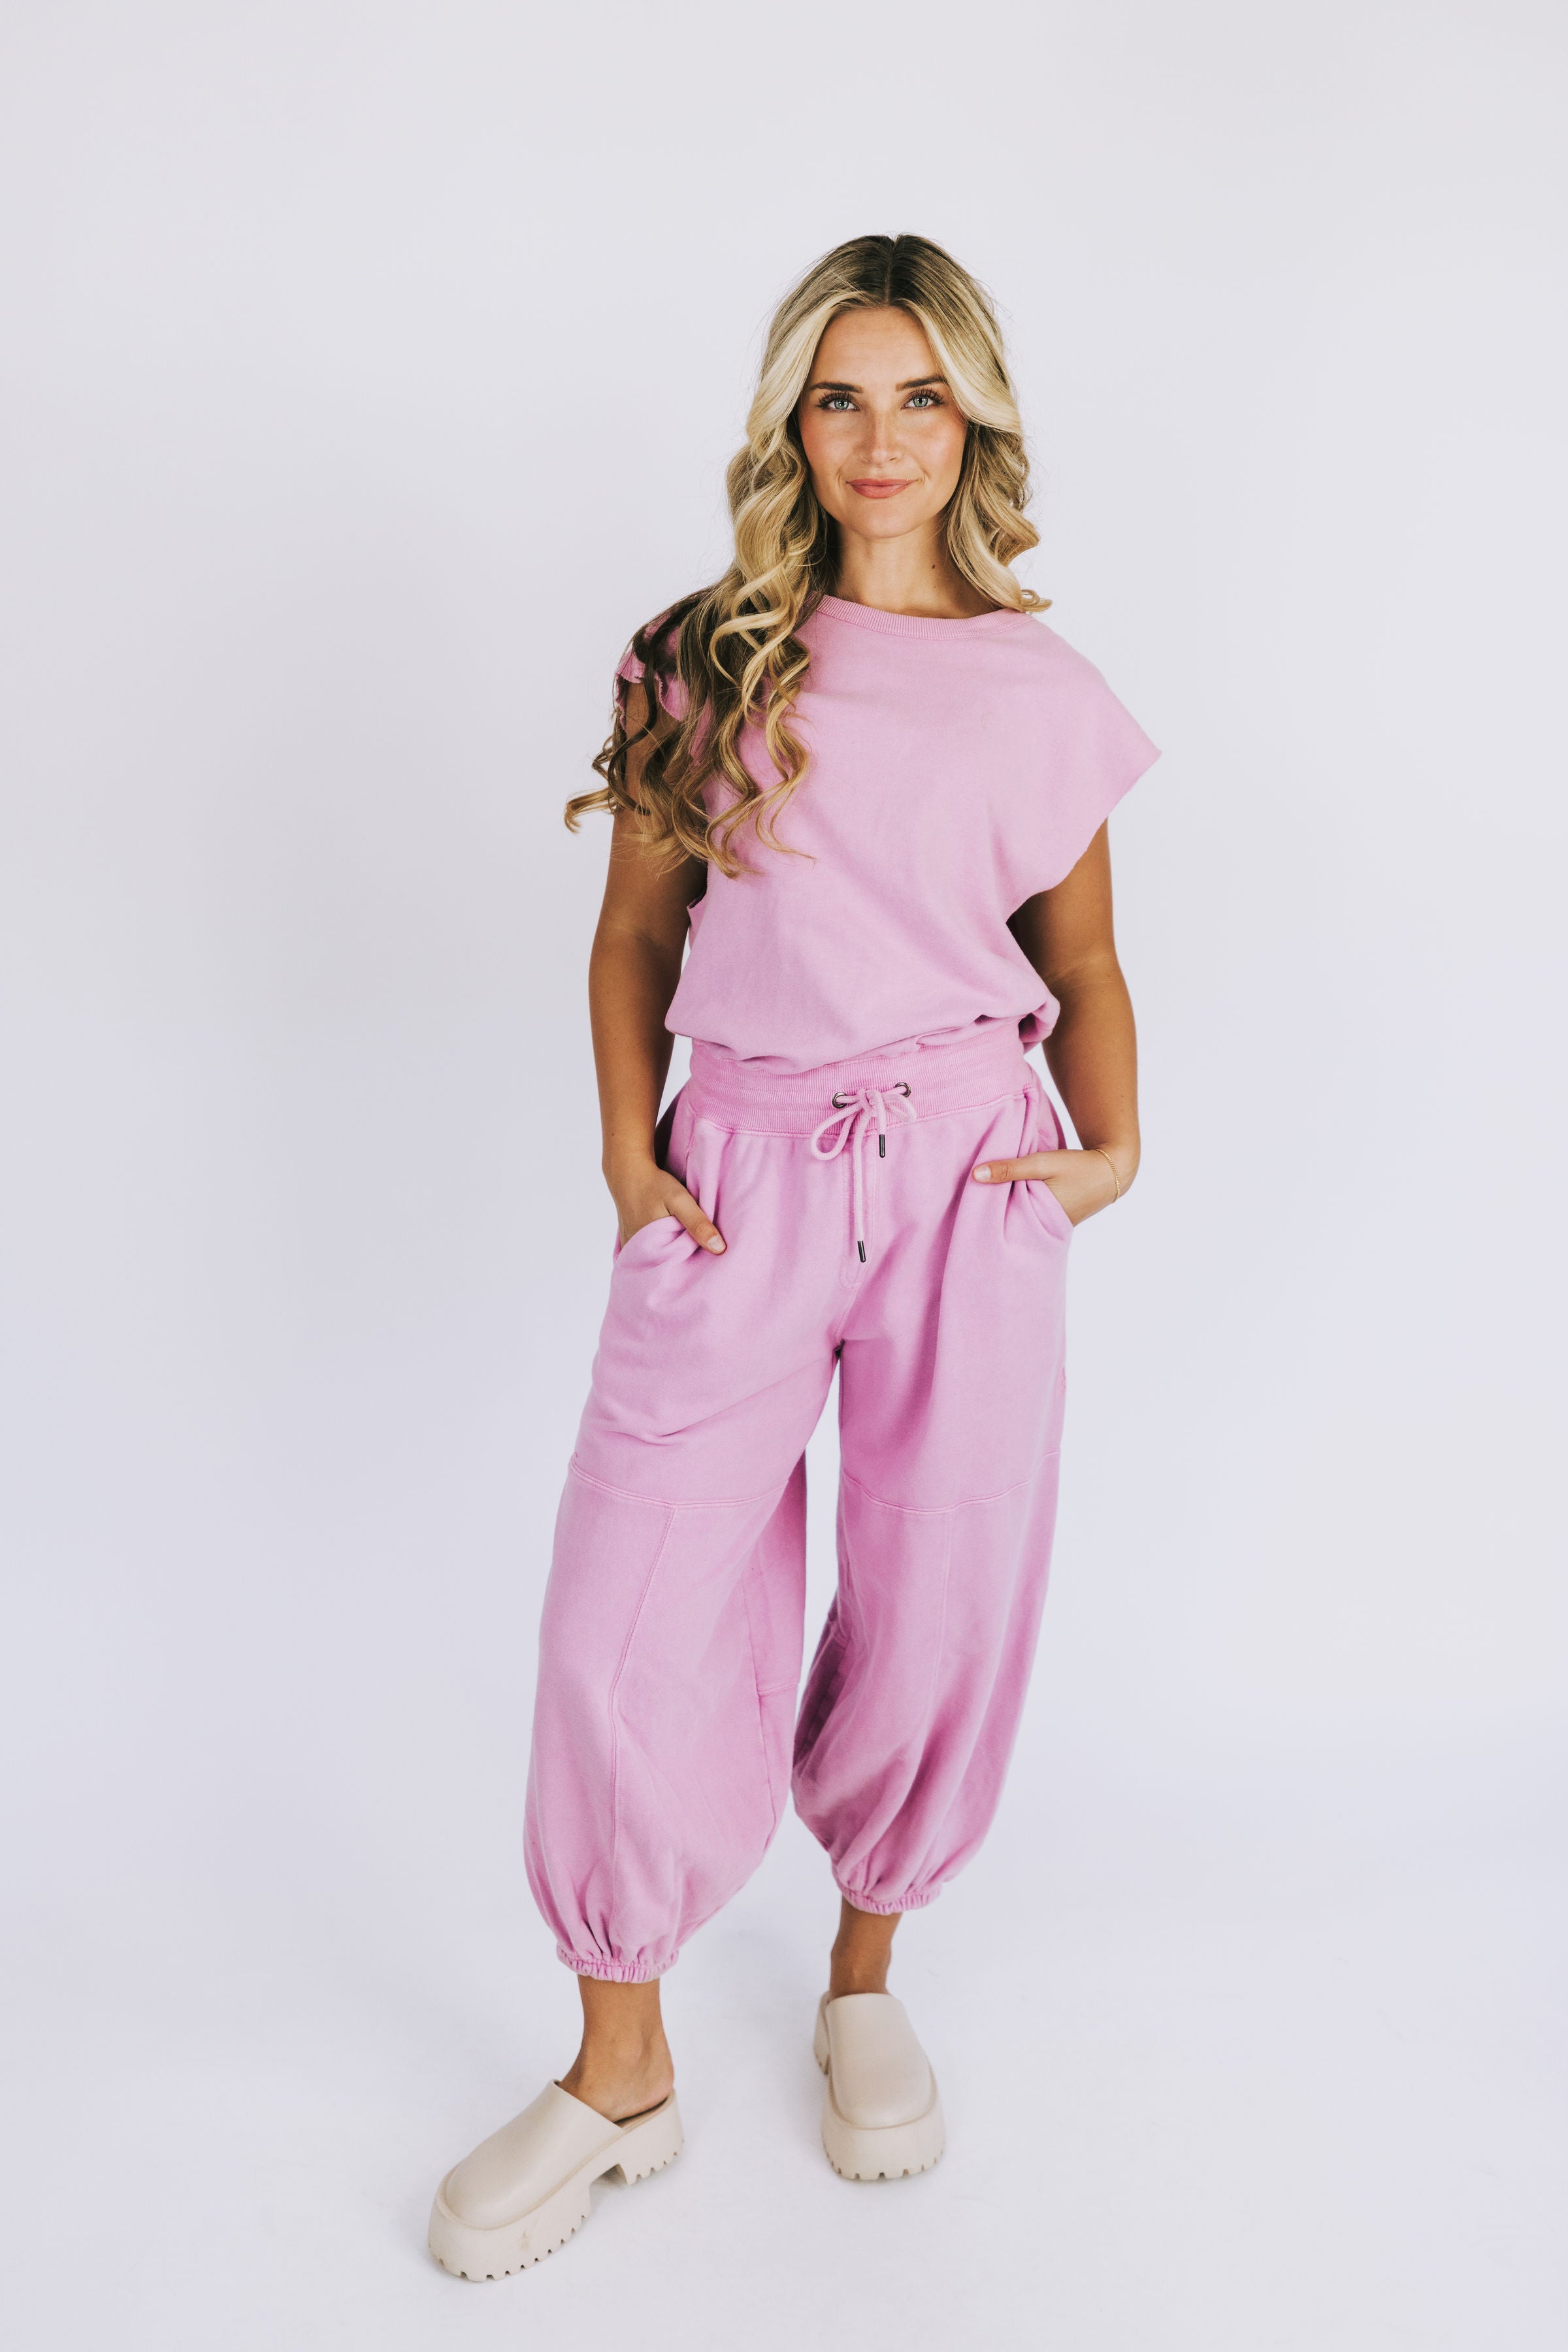 FREE PEOPLE - Throw And Go Onesie